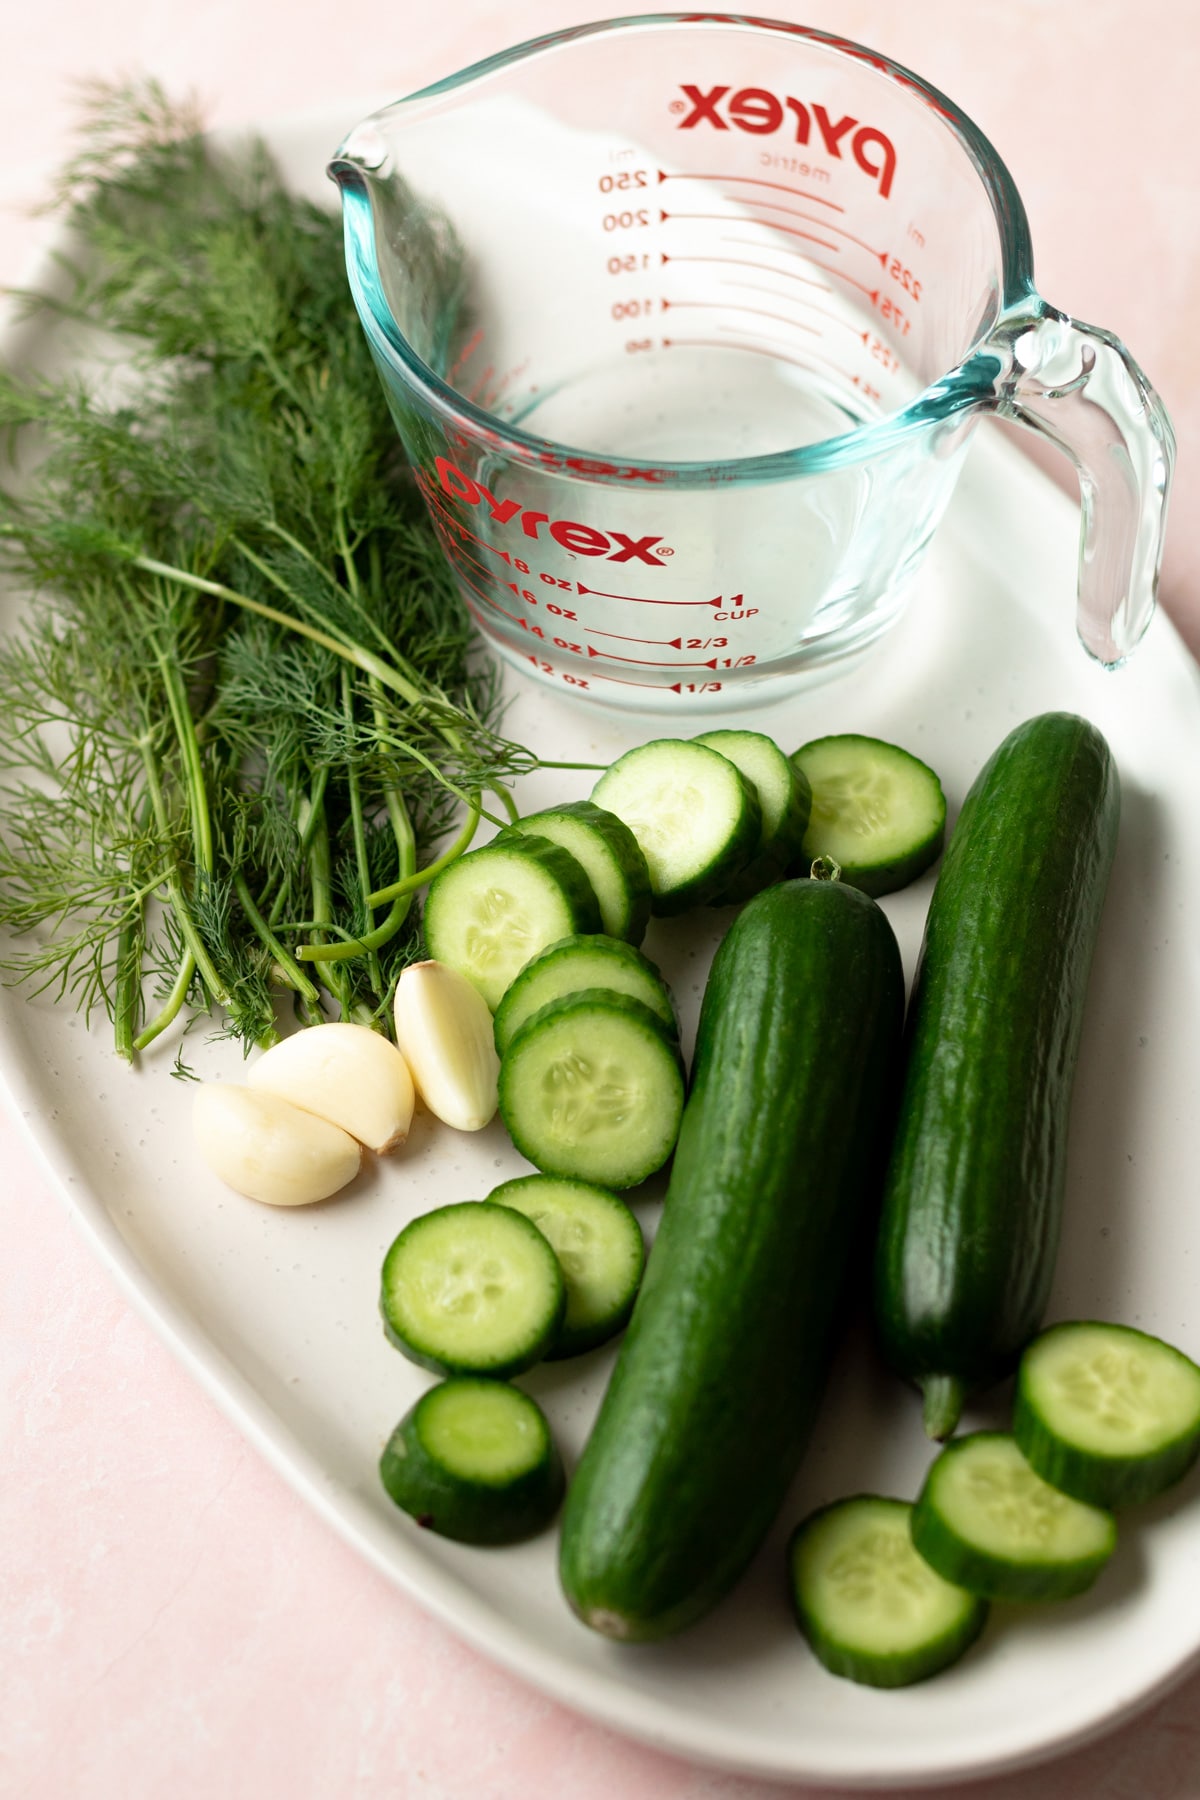 Ingredients for small batch refrigerator dill pickles.